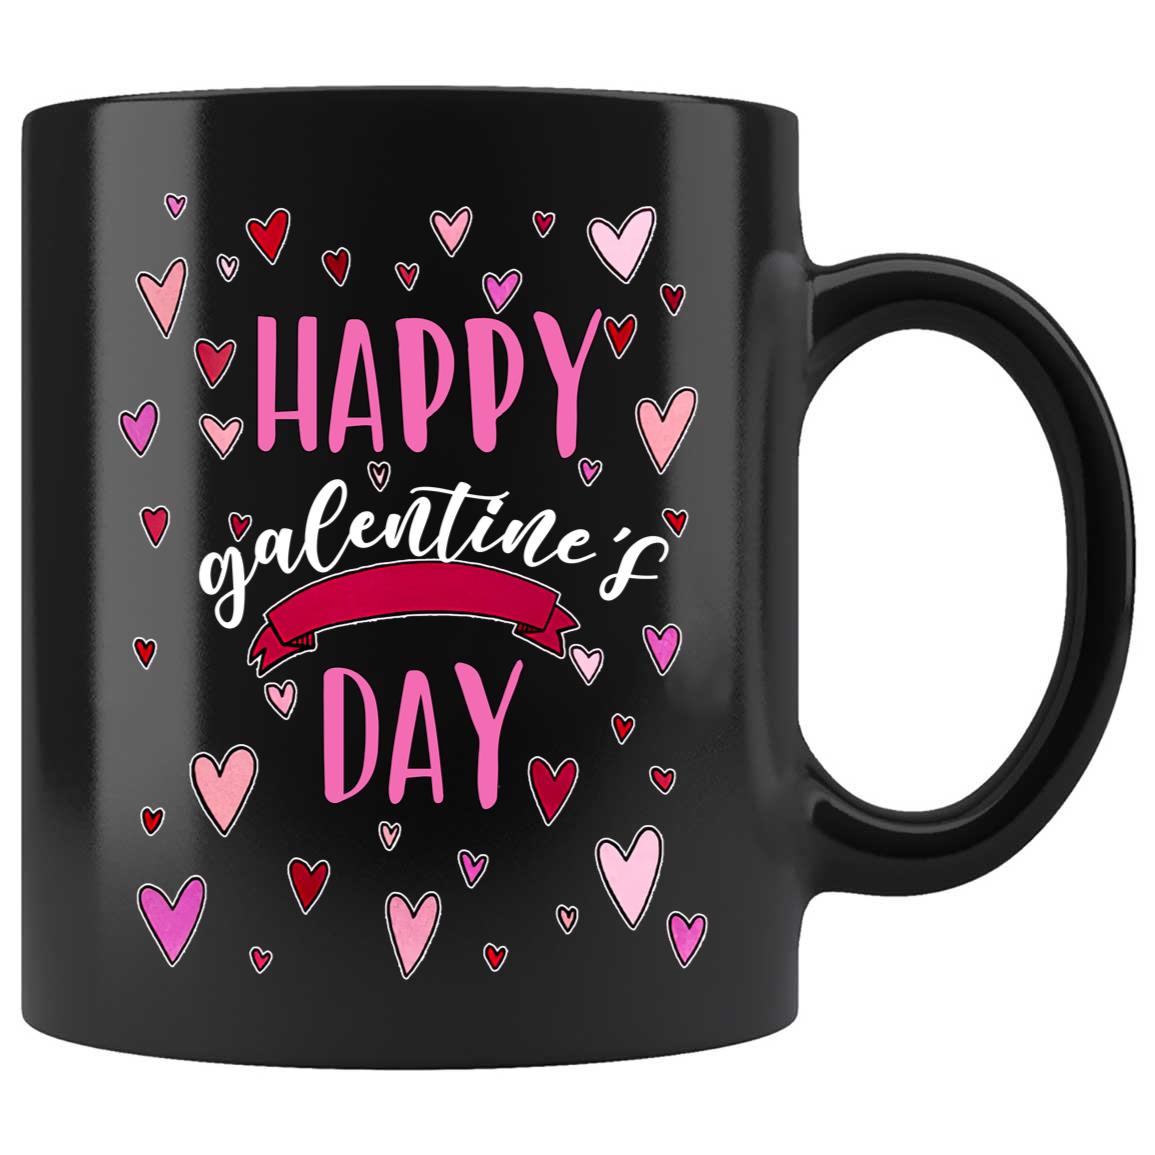 Gifts from the Kitchen, Galentine Cups & Mugs